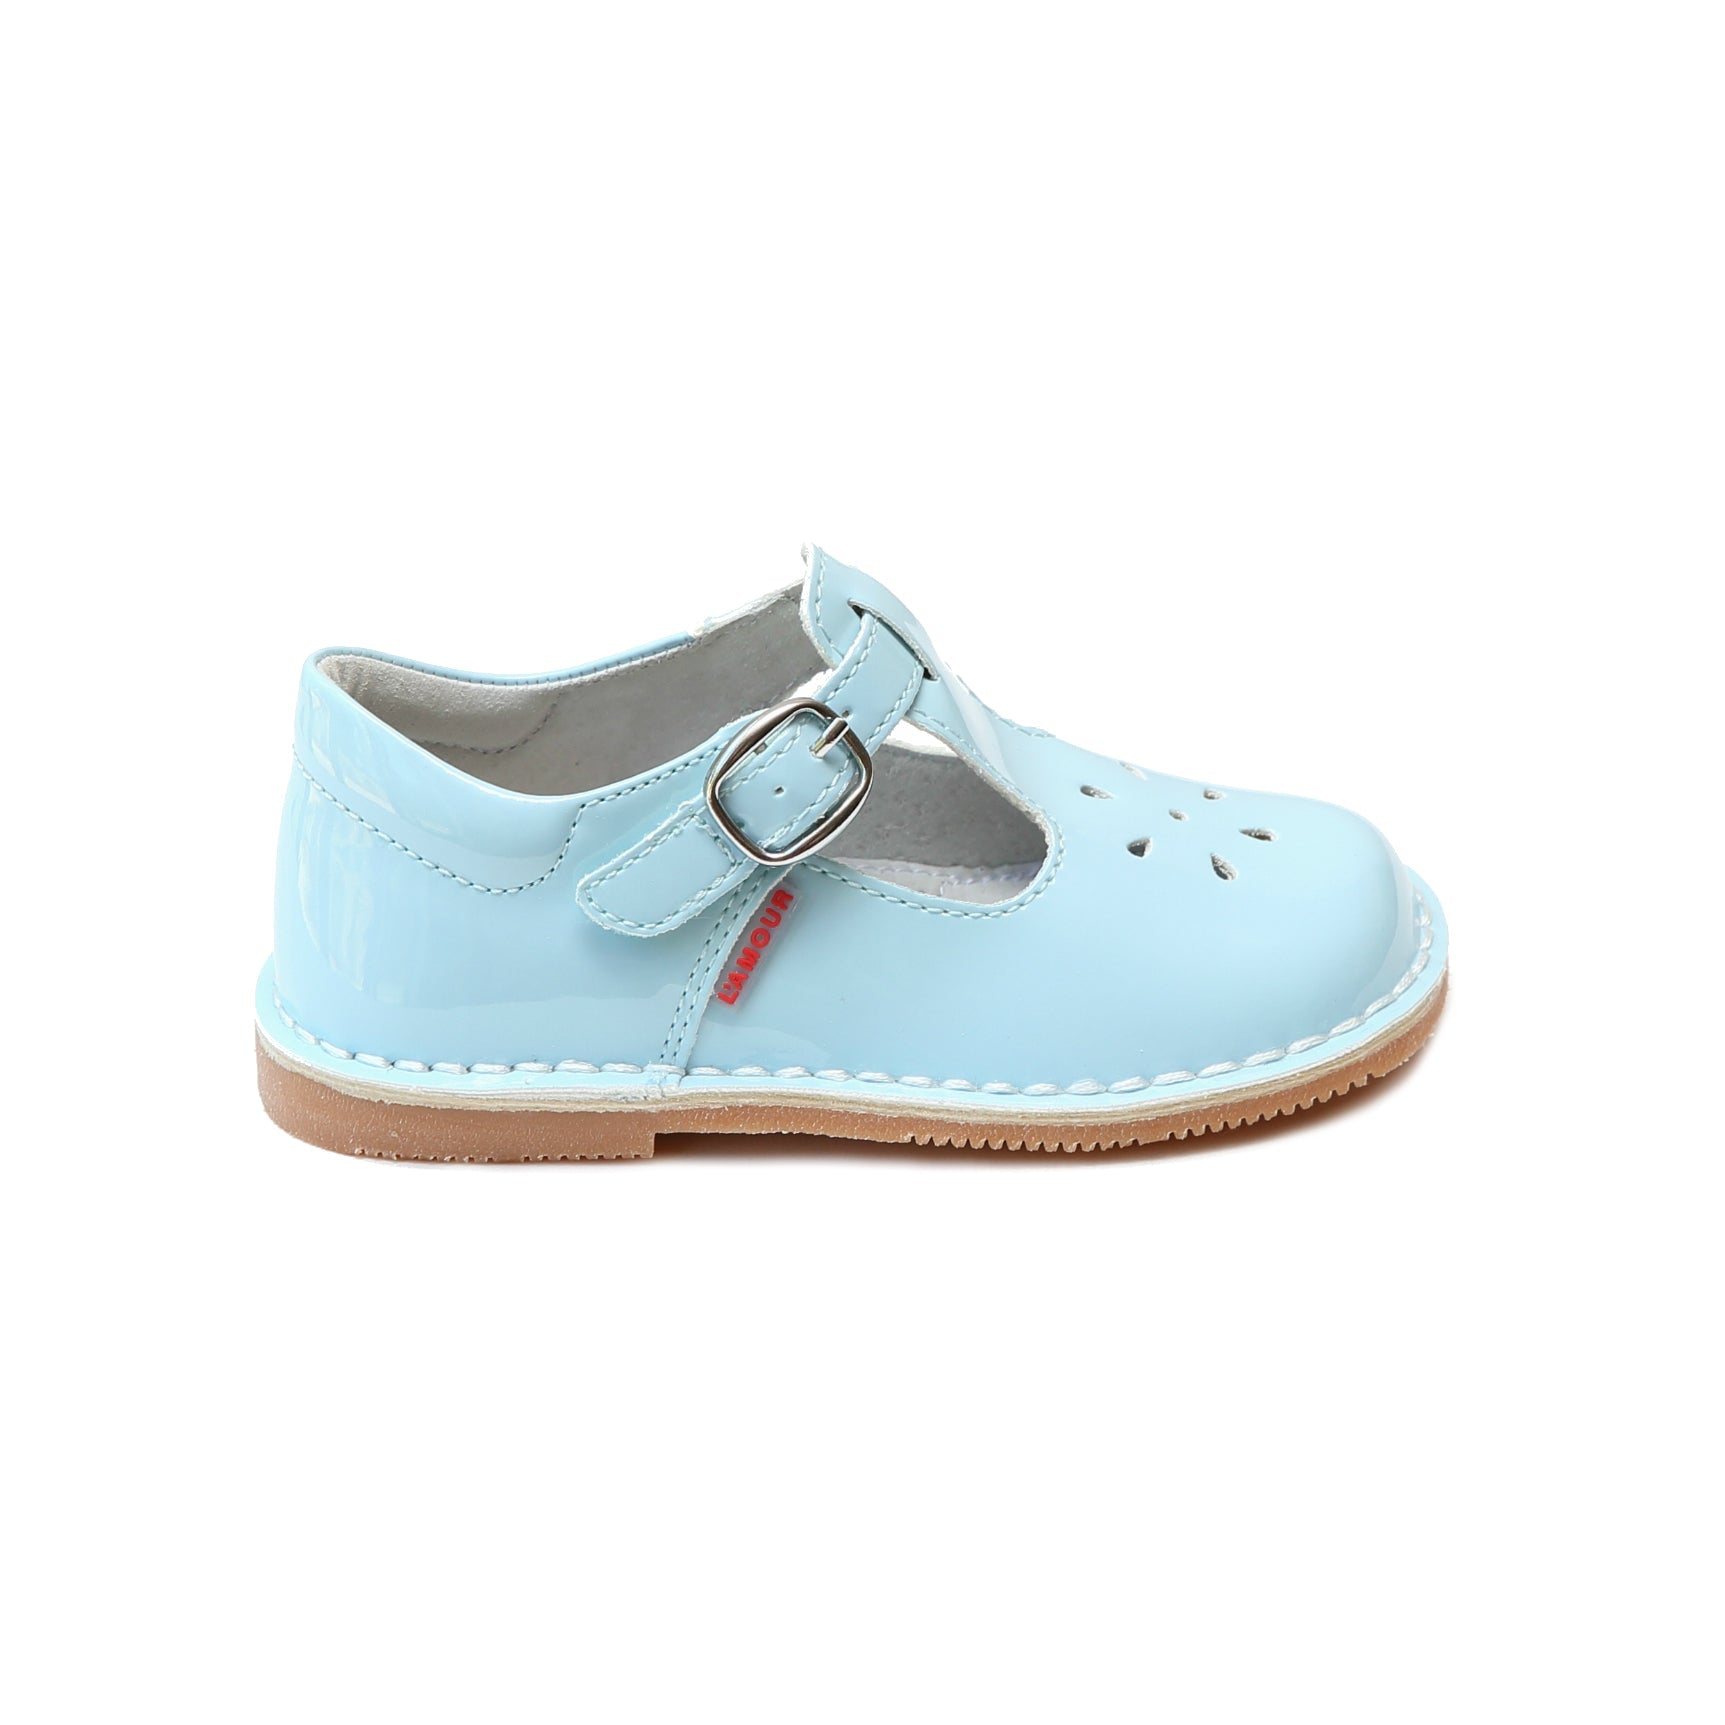 L'Amour Joy Classic Patent T-Strap Mary Jane Mary Janes